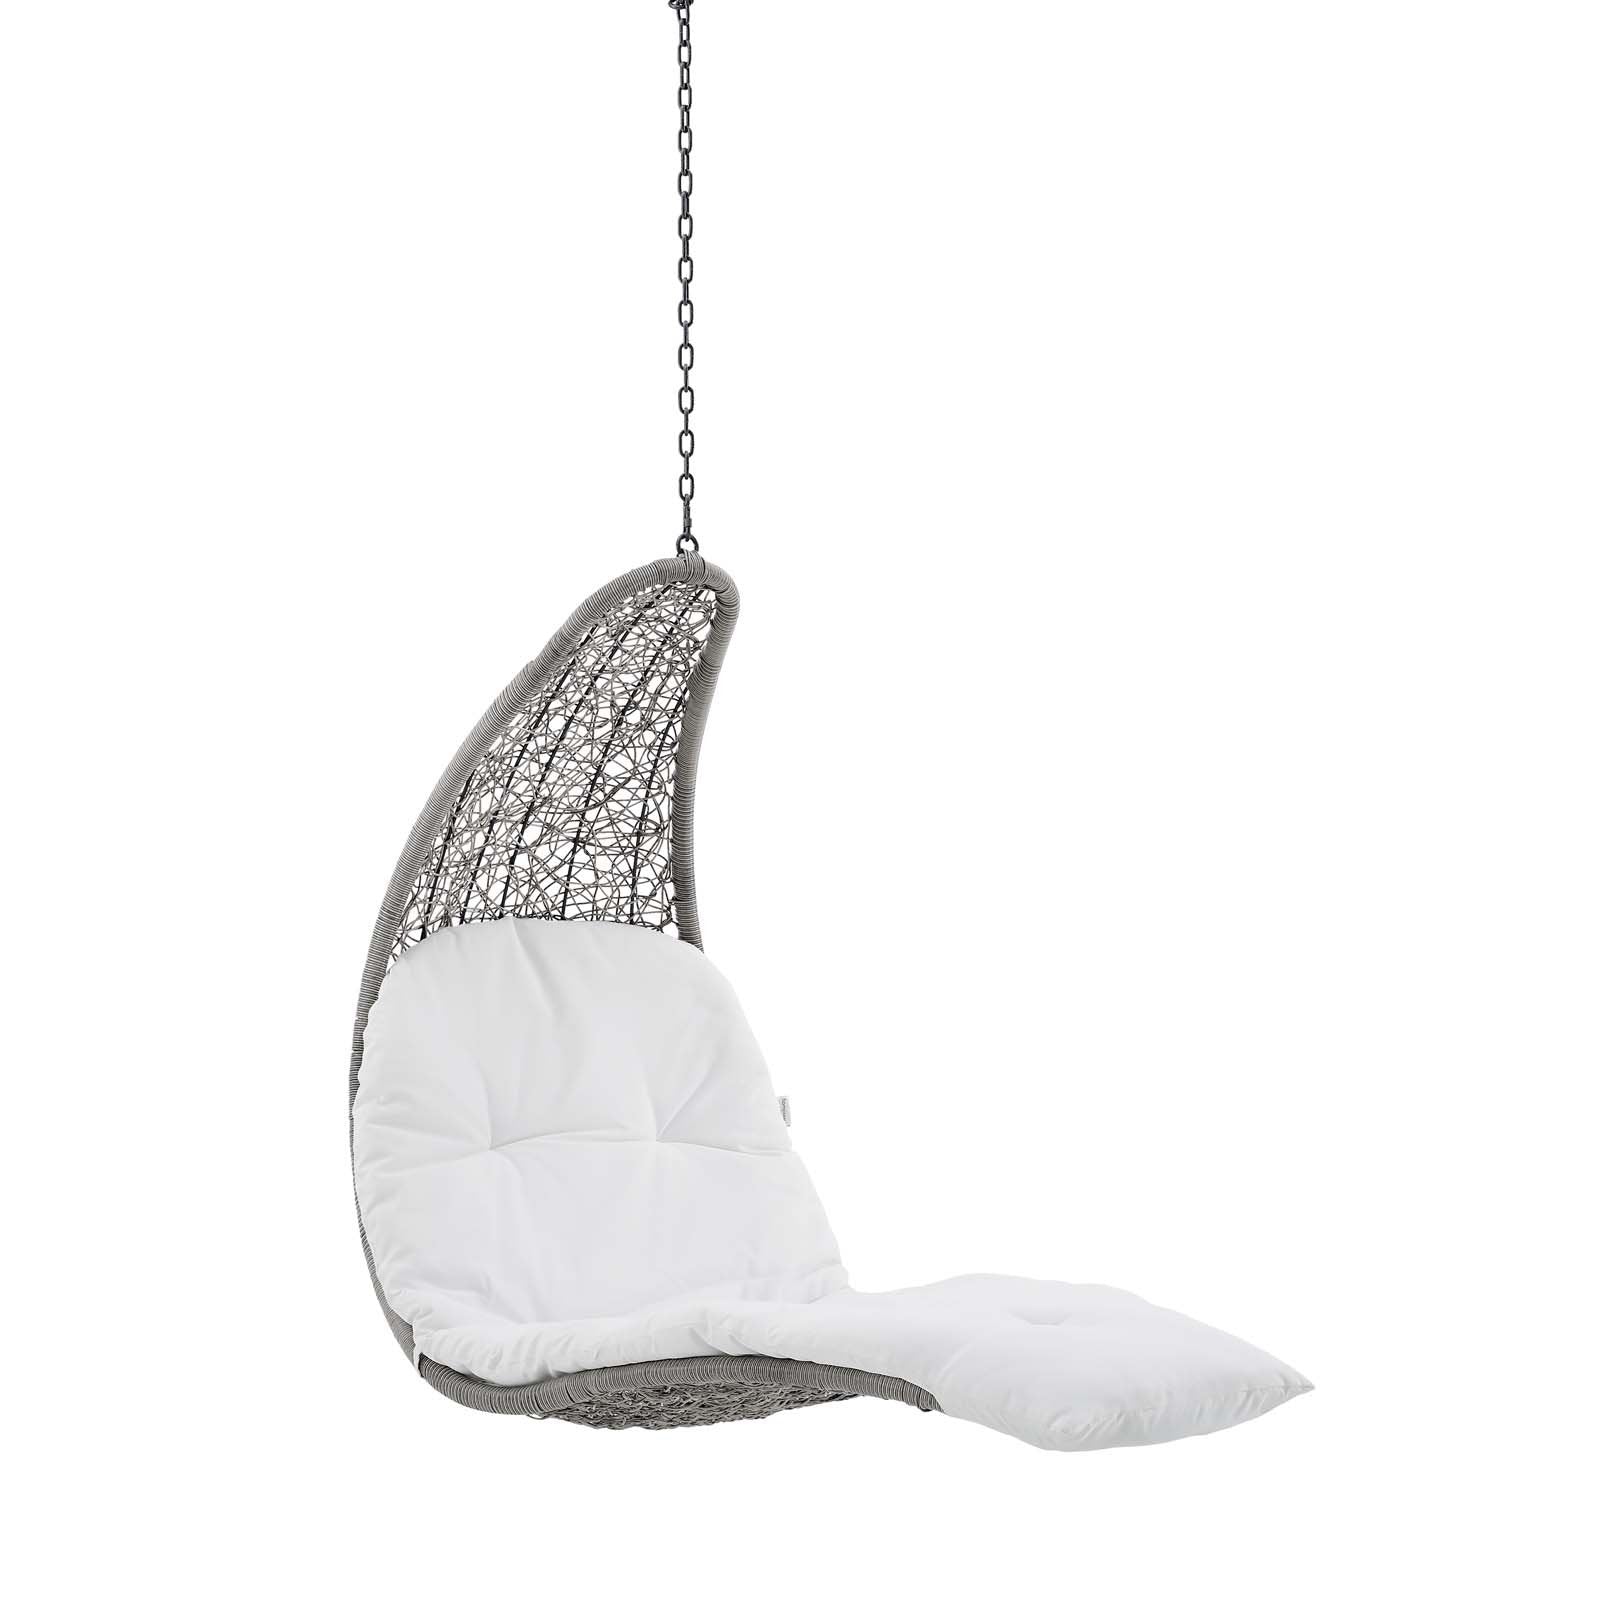 Landscape Outdoor Patio Hanging Chaise Lounge Outdoor Patio Swing Chair - East Shore Modern Home Furnishings